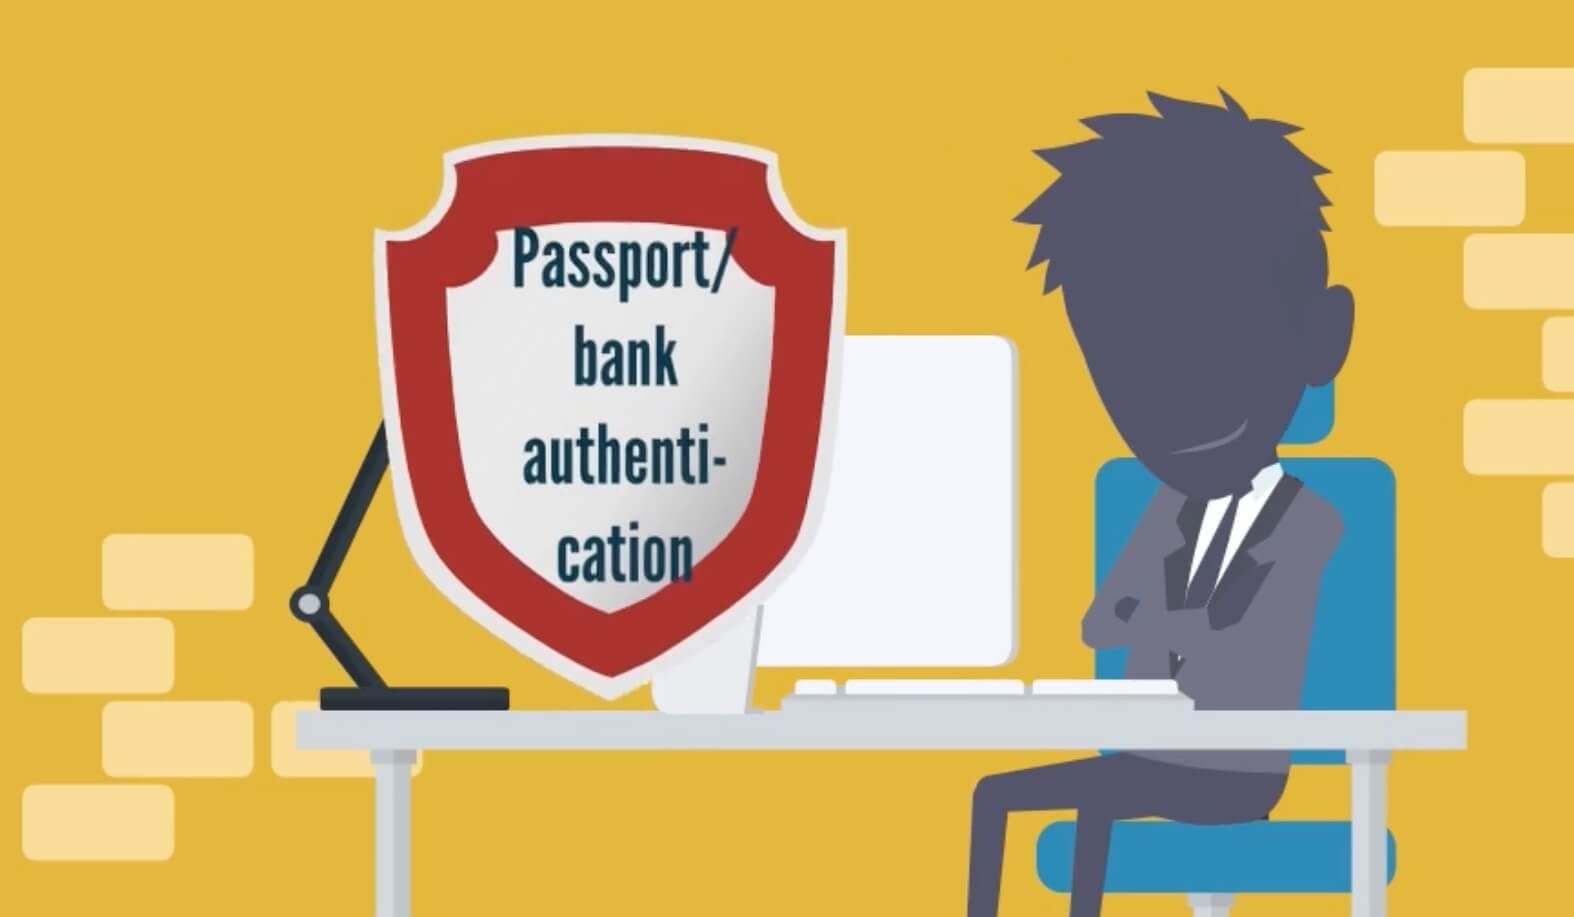 Bank authentication guarantees real identity